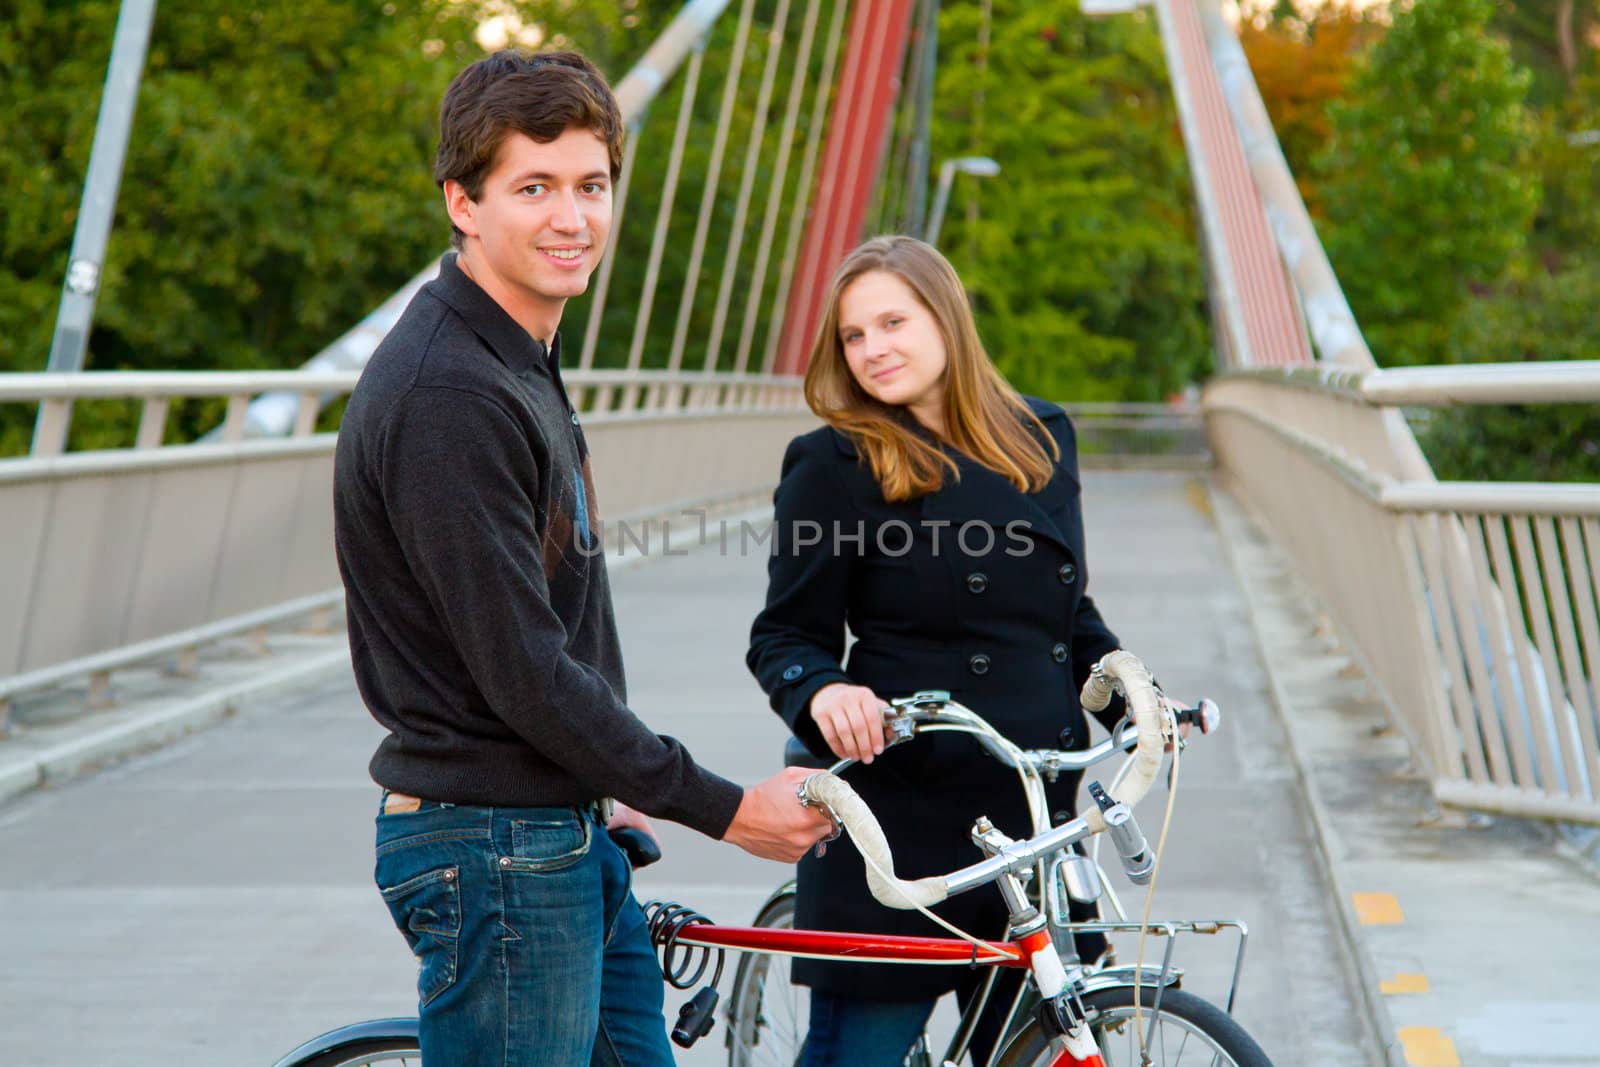 A married man and woman with their bikes on a bicycle path bridge.